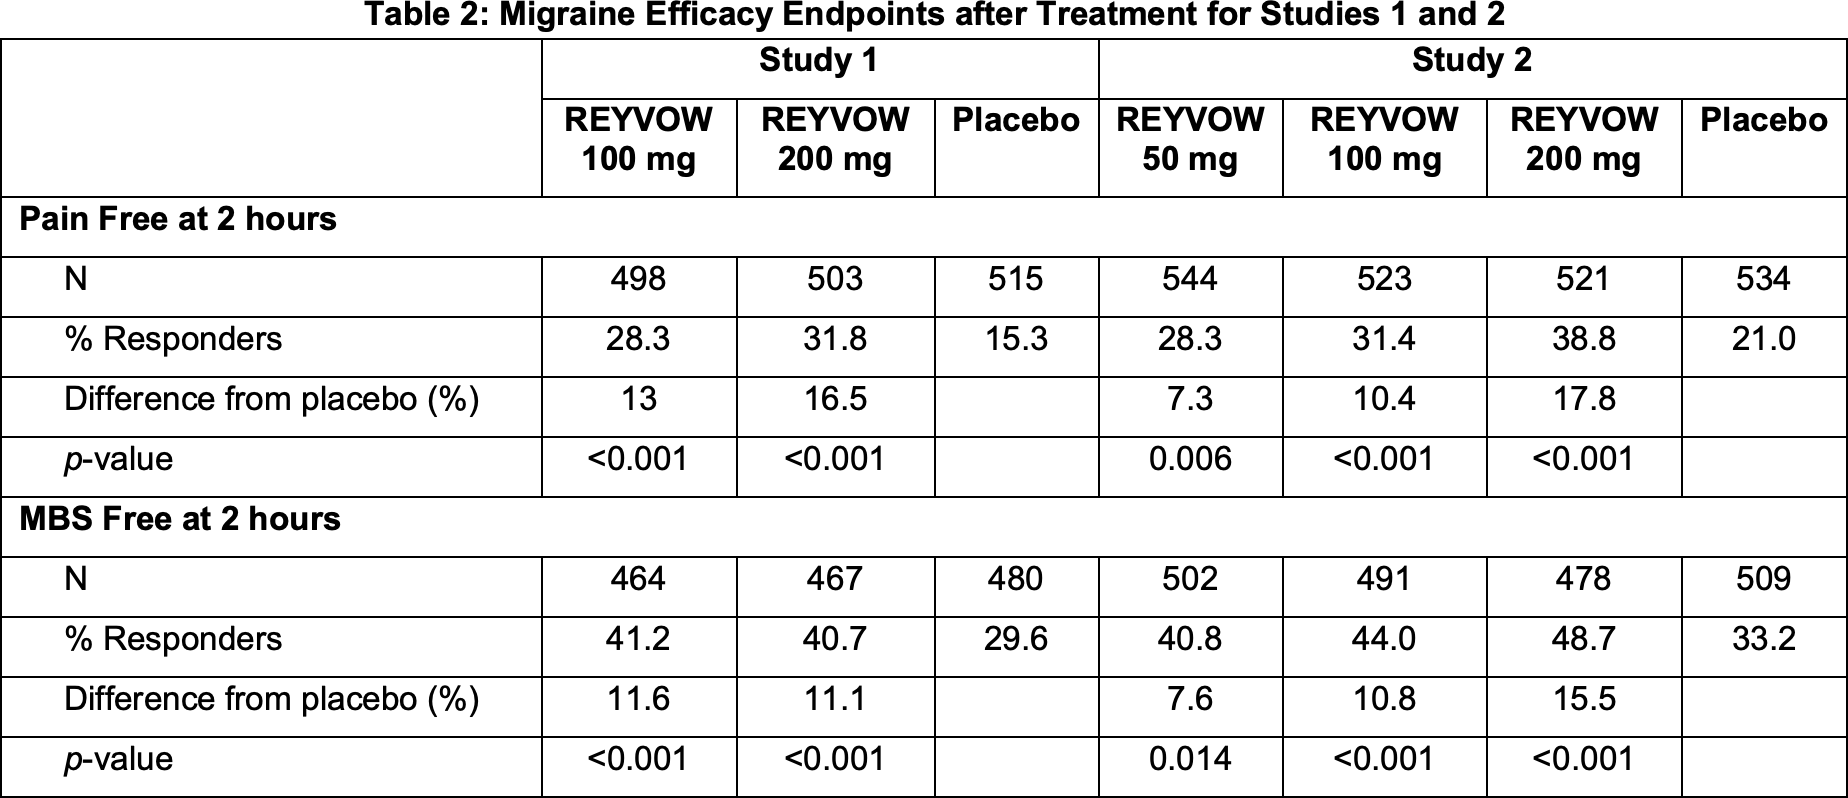 lasmiditan efficacy 01 - Reyvow: Completely New Drug for Acute Treatment of Migraine